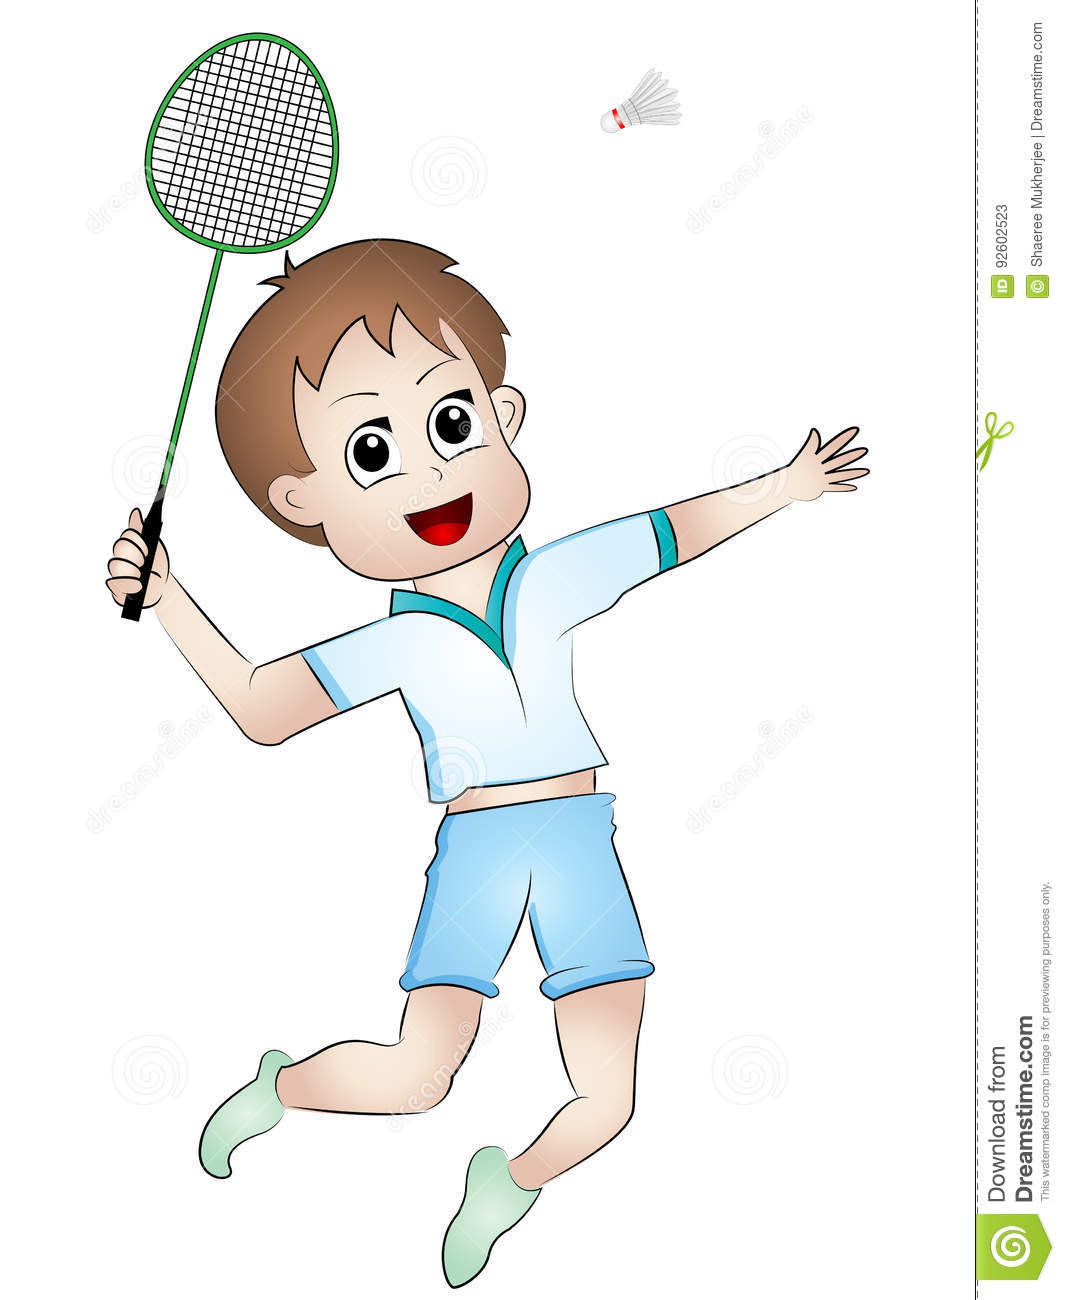 Playing badminton clipart